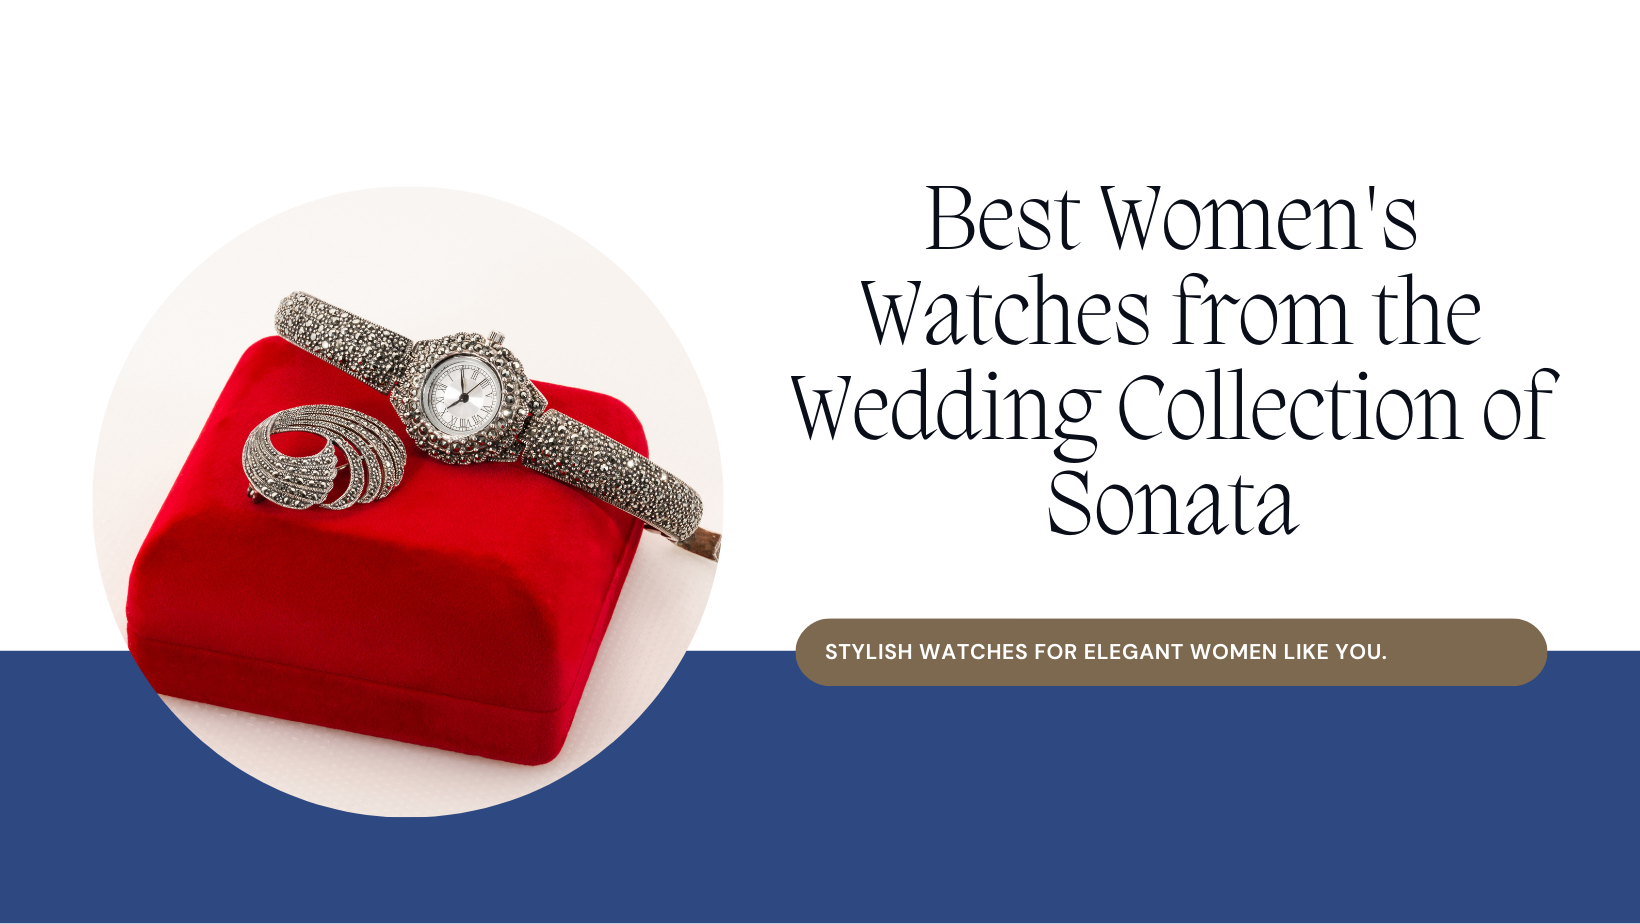 Best Women's Watches from the Wedding Collection of Sonata